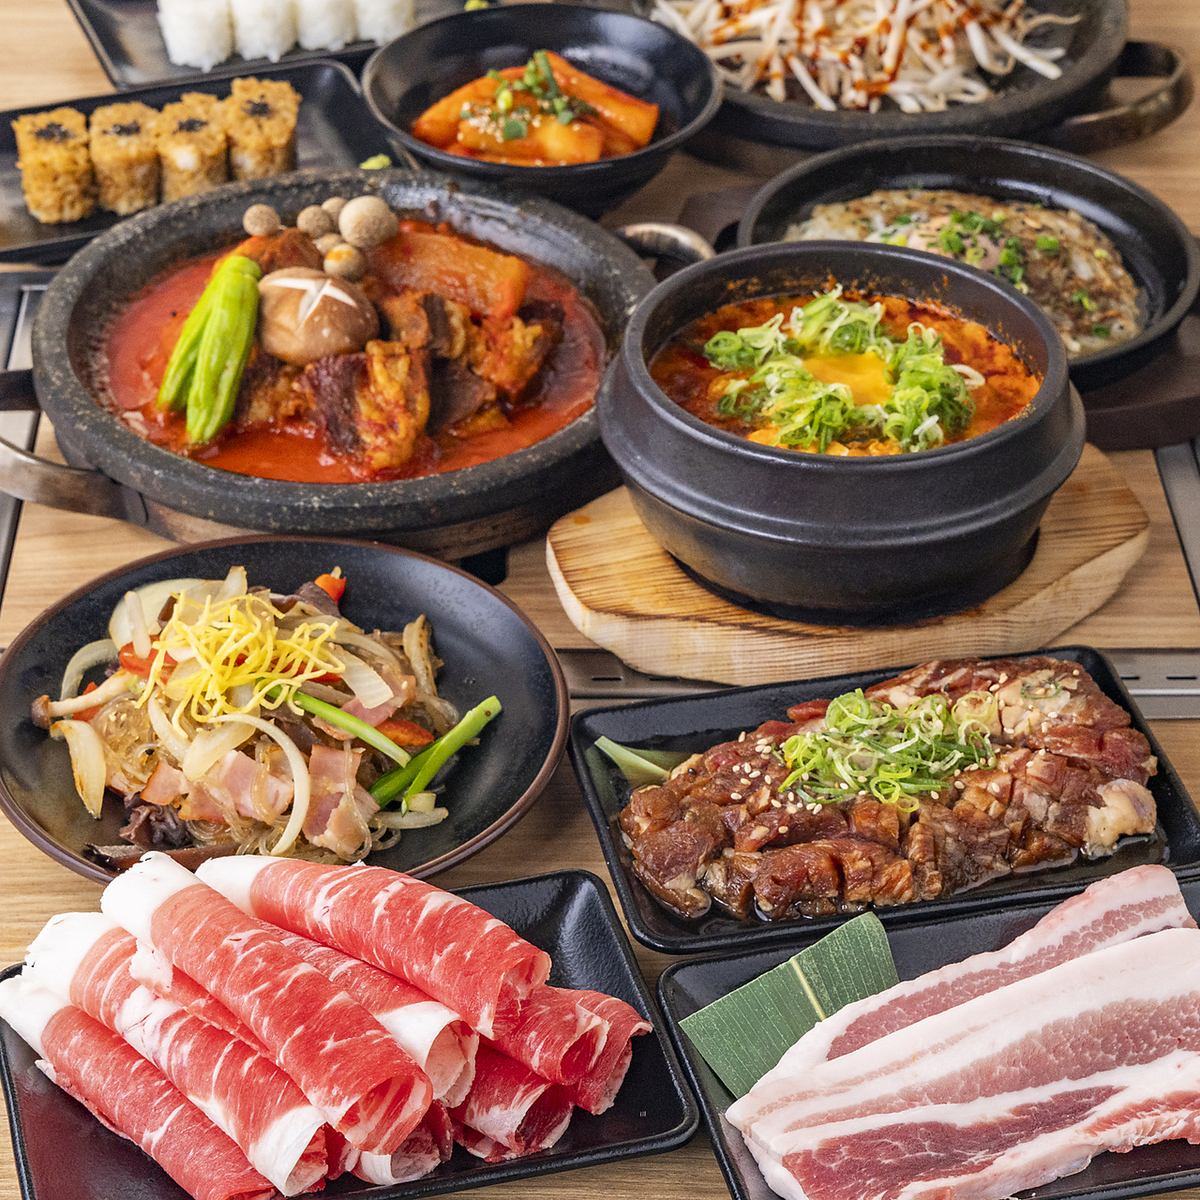 We offer a wide variety of Korean dishes, from classic samgyeopsal to jjigae.